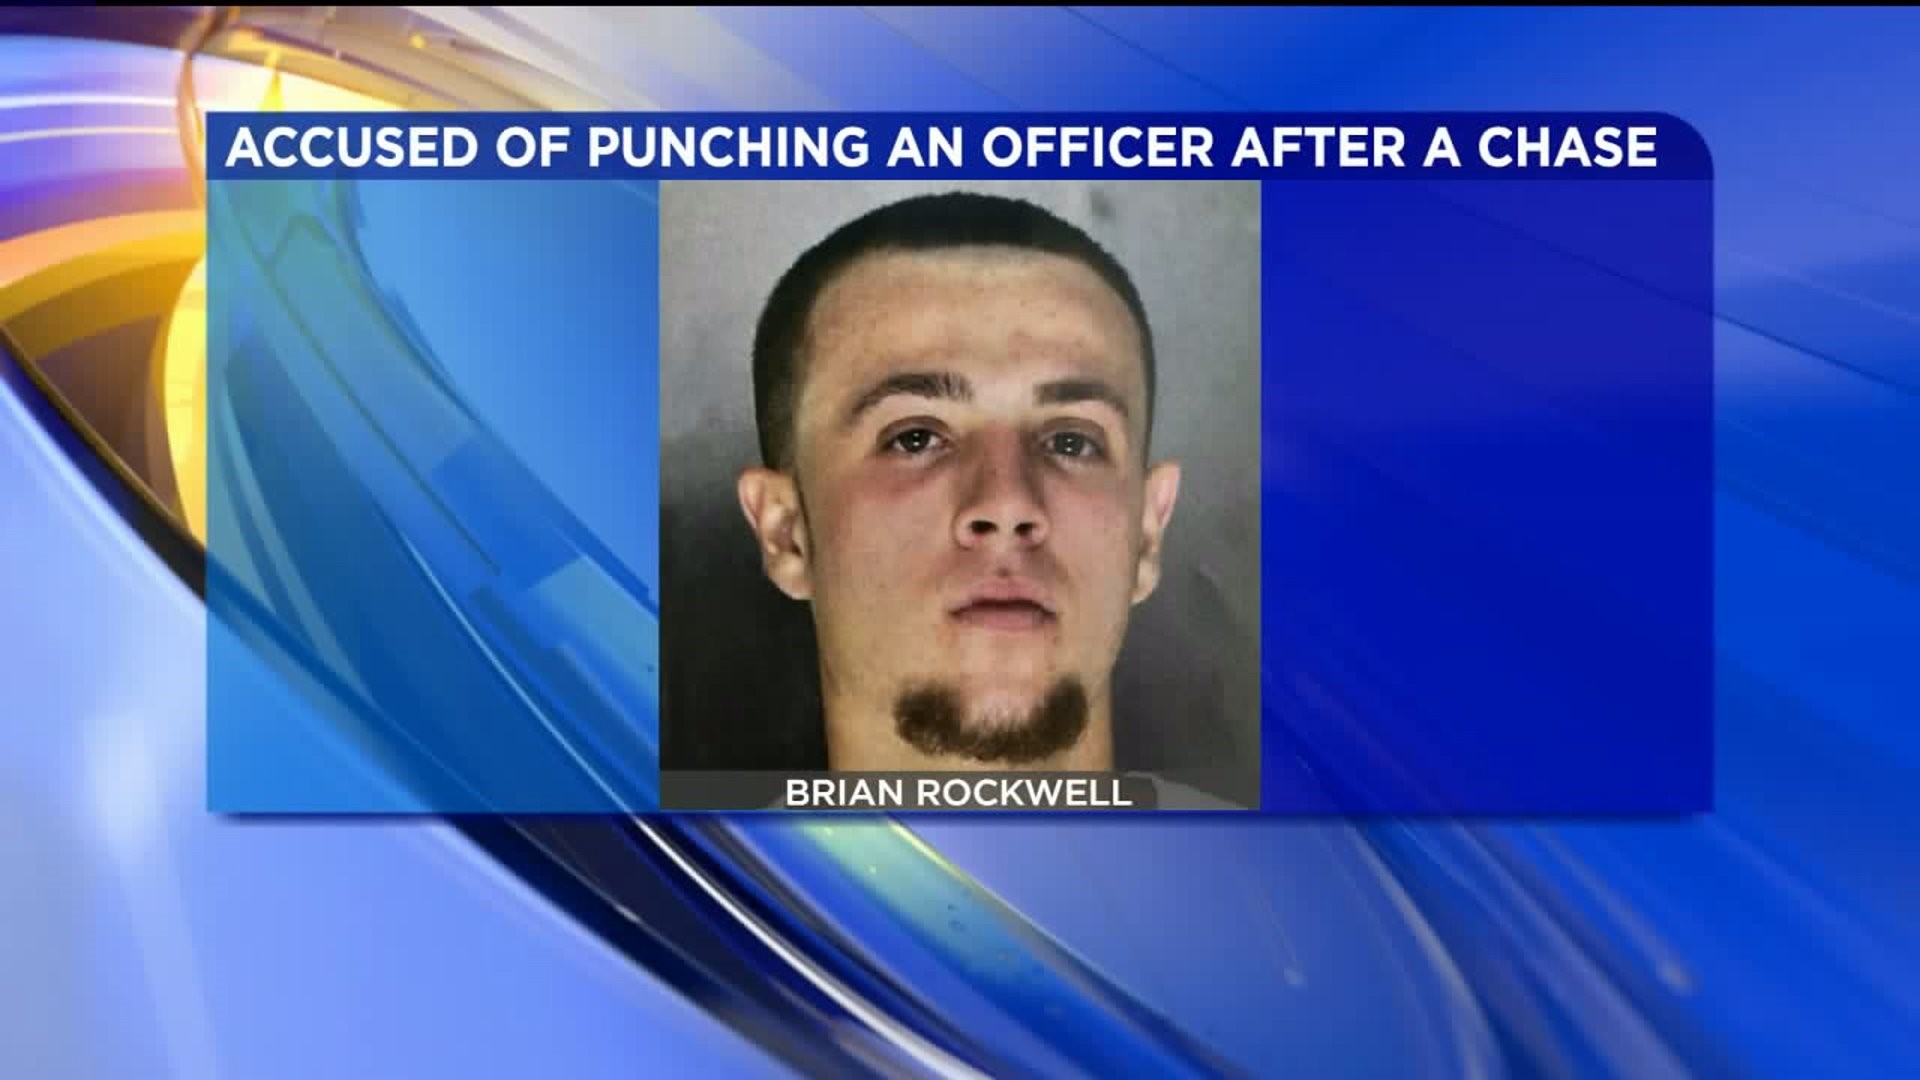 Archbald Man Facing Assault Charges After Punching an Officer